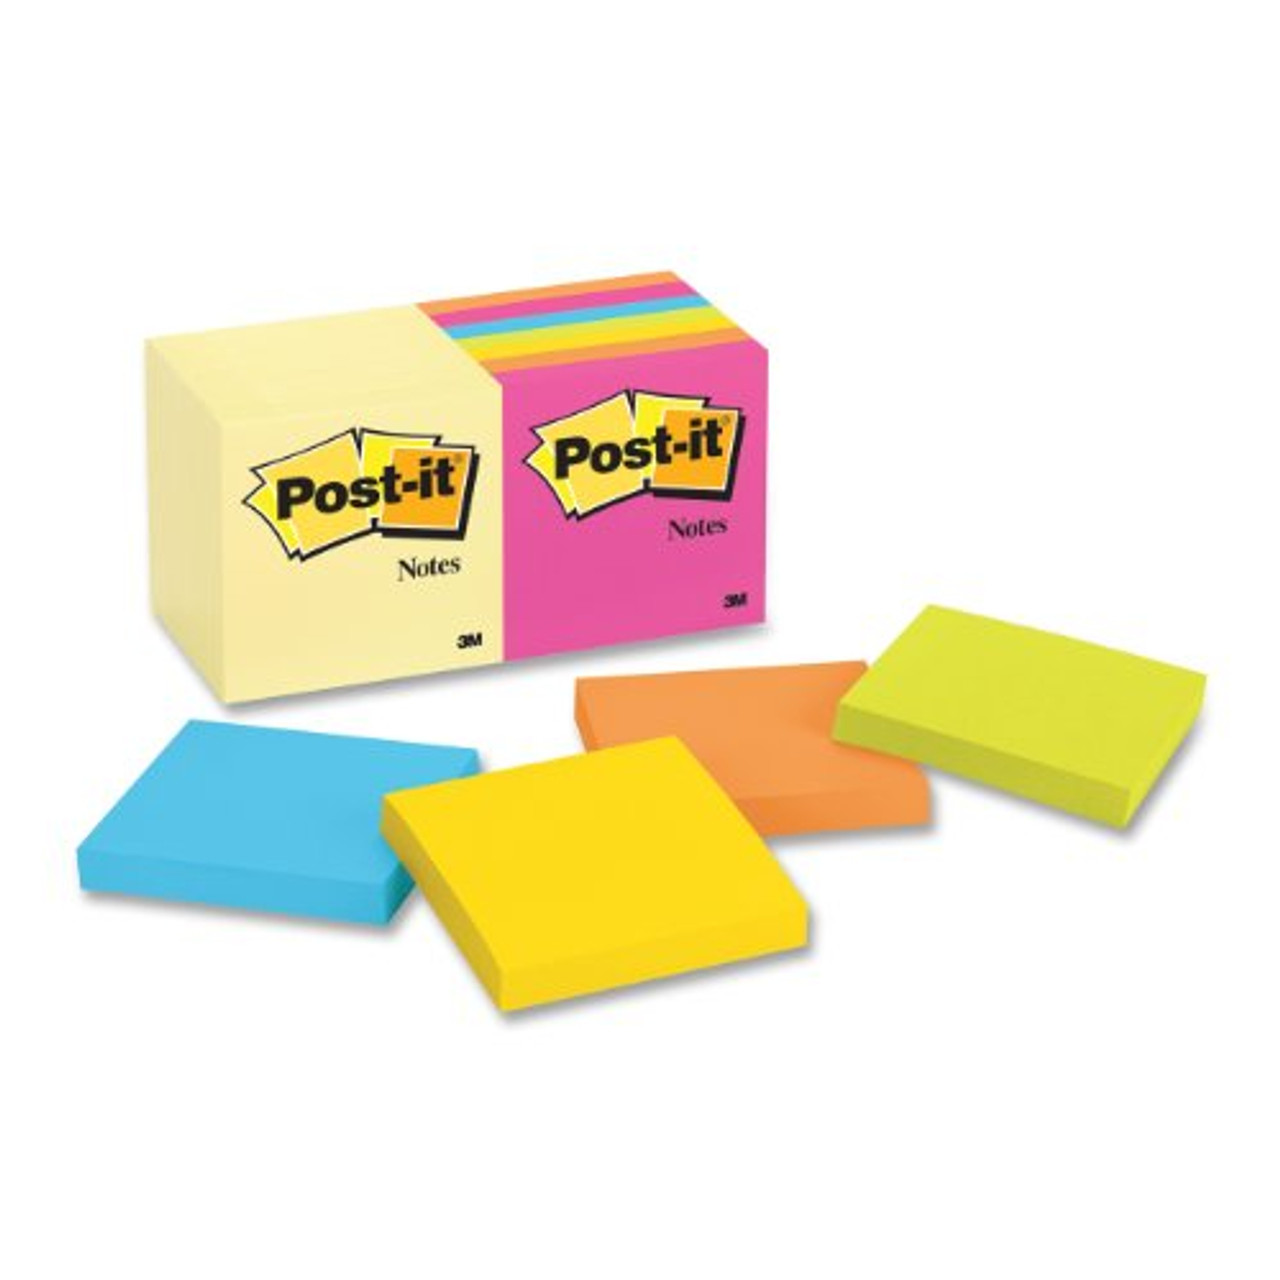 Original Pads Assorted Value Pack, 3 x 3, (14) Canary Yellow, (4